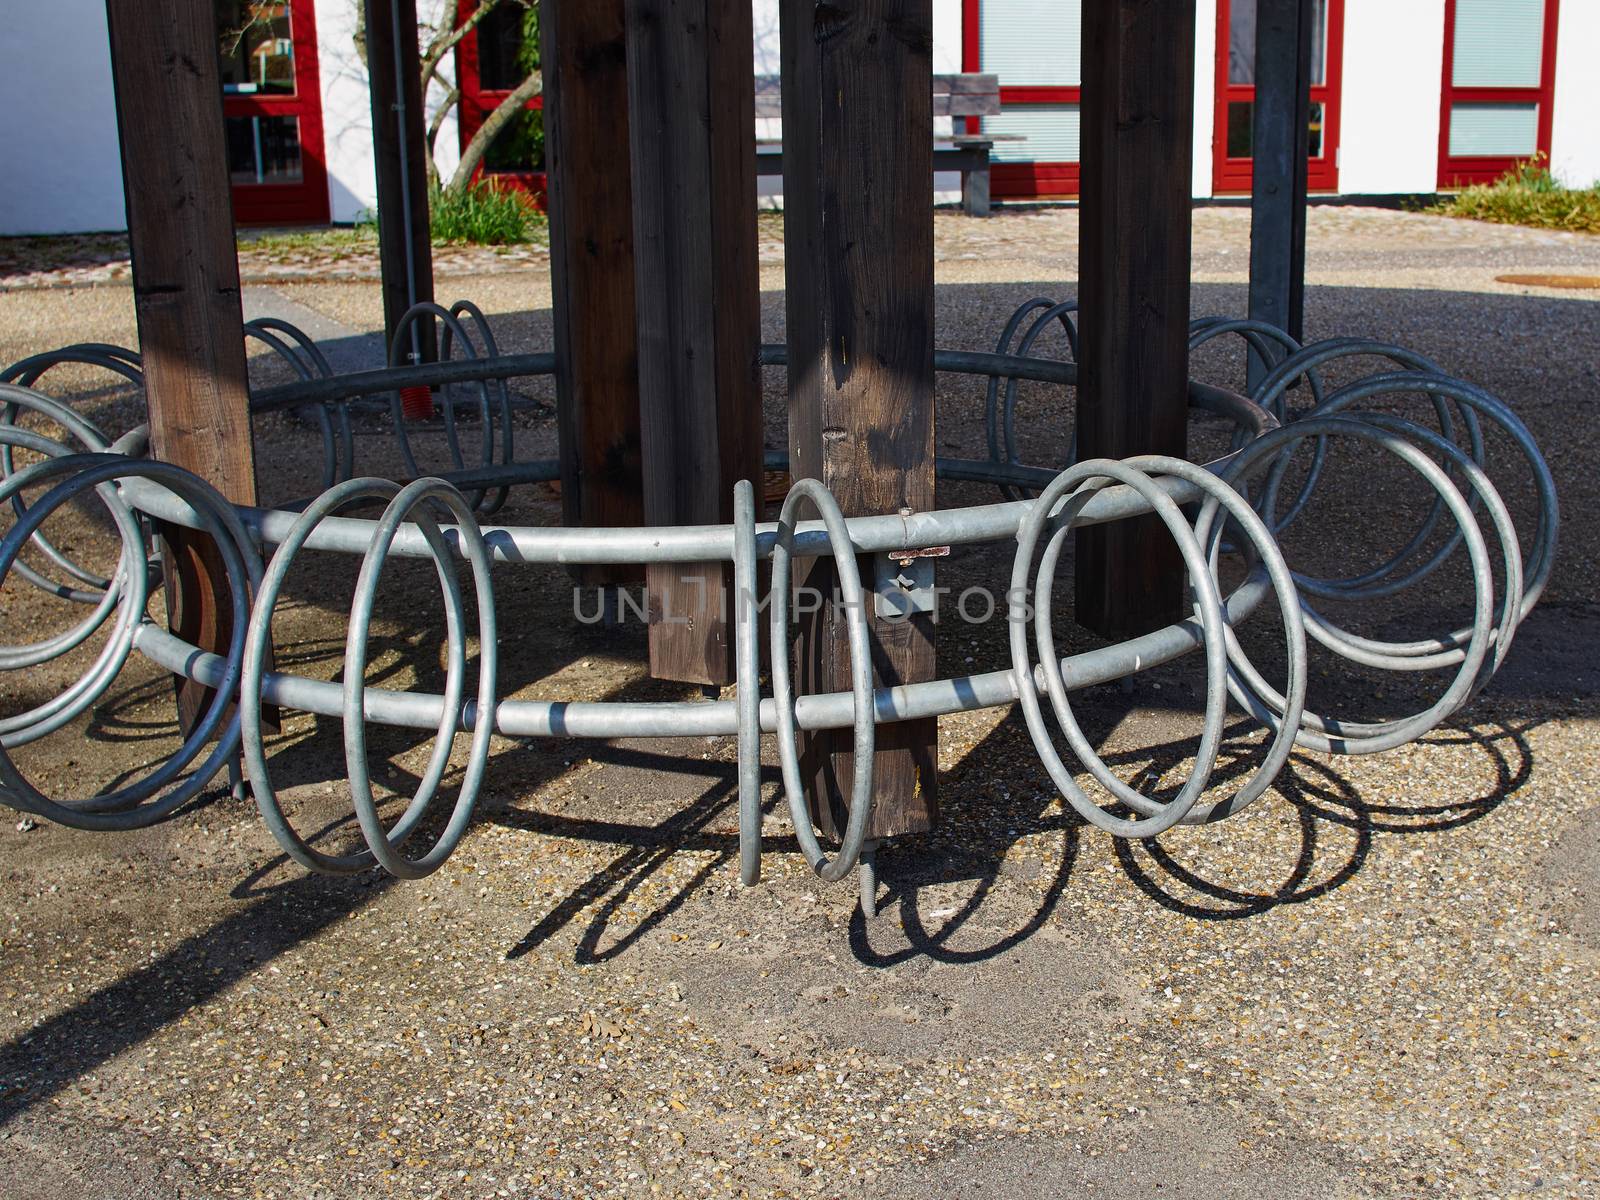 Parking space rack for bicycles bikes made from metal in a city